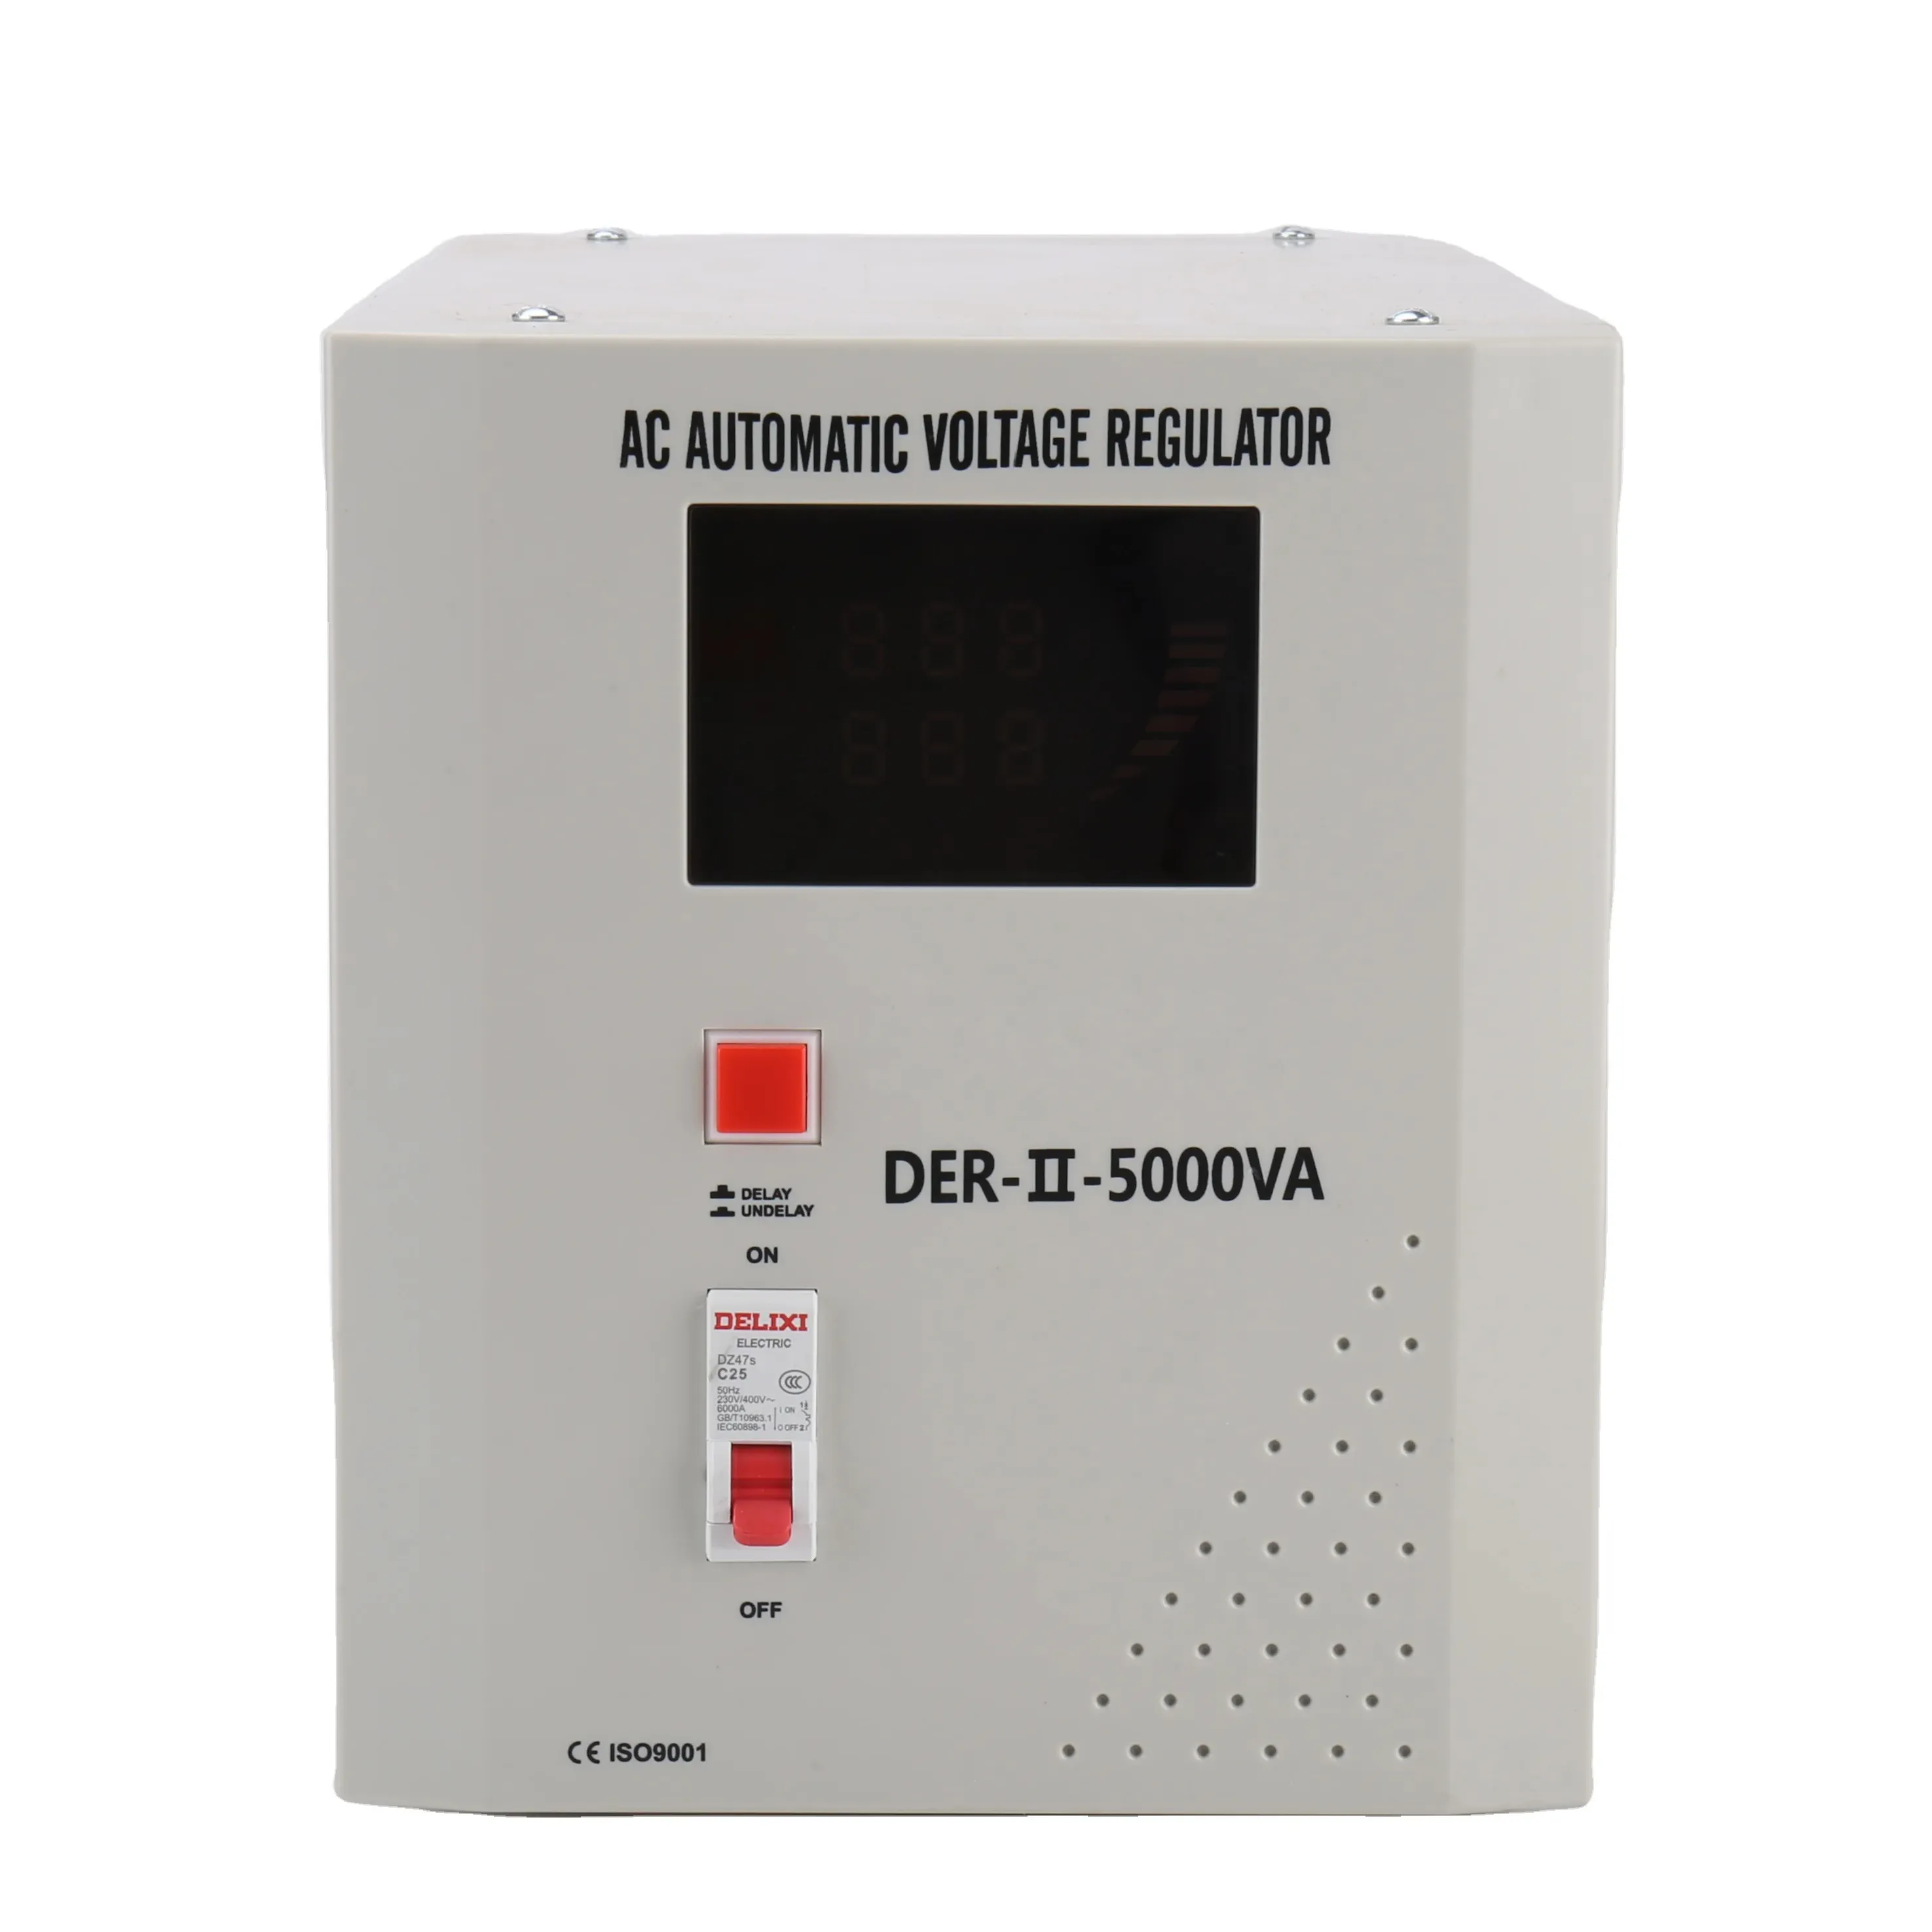 5000V Fully Automatic AC Household Stabilized Power DER Series Electronic Voltage Regulators